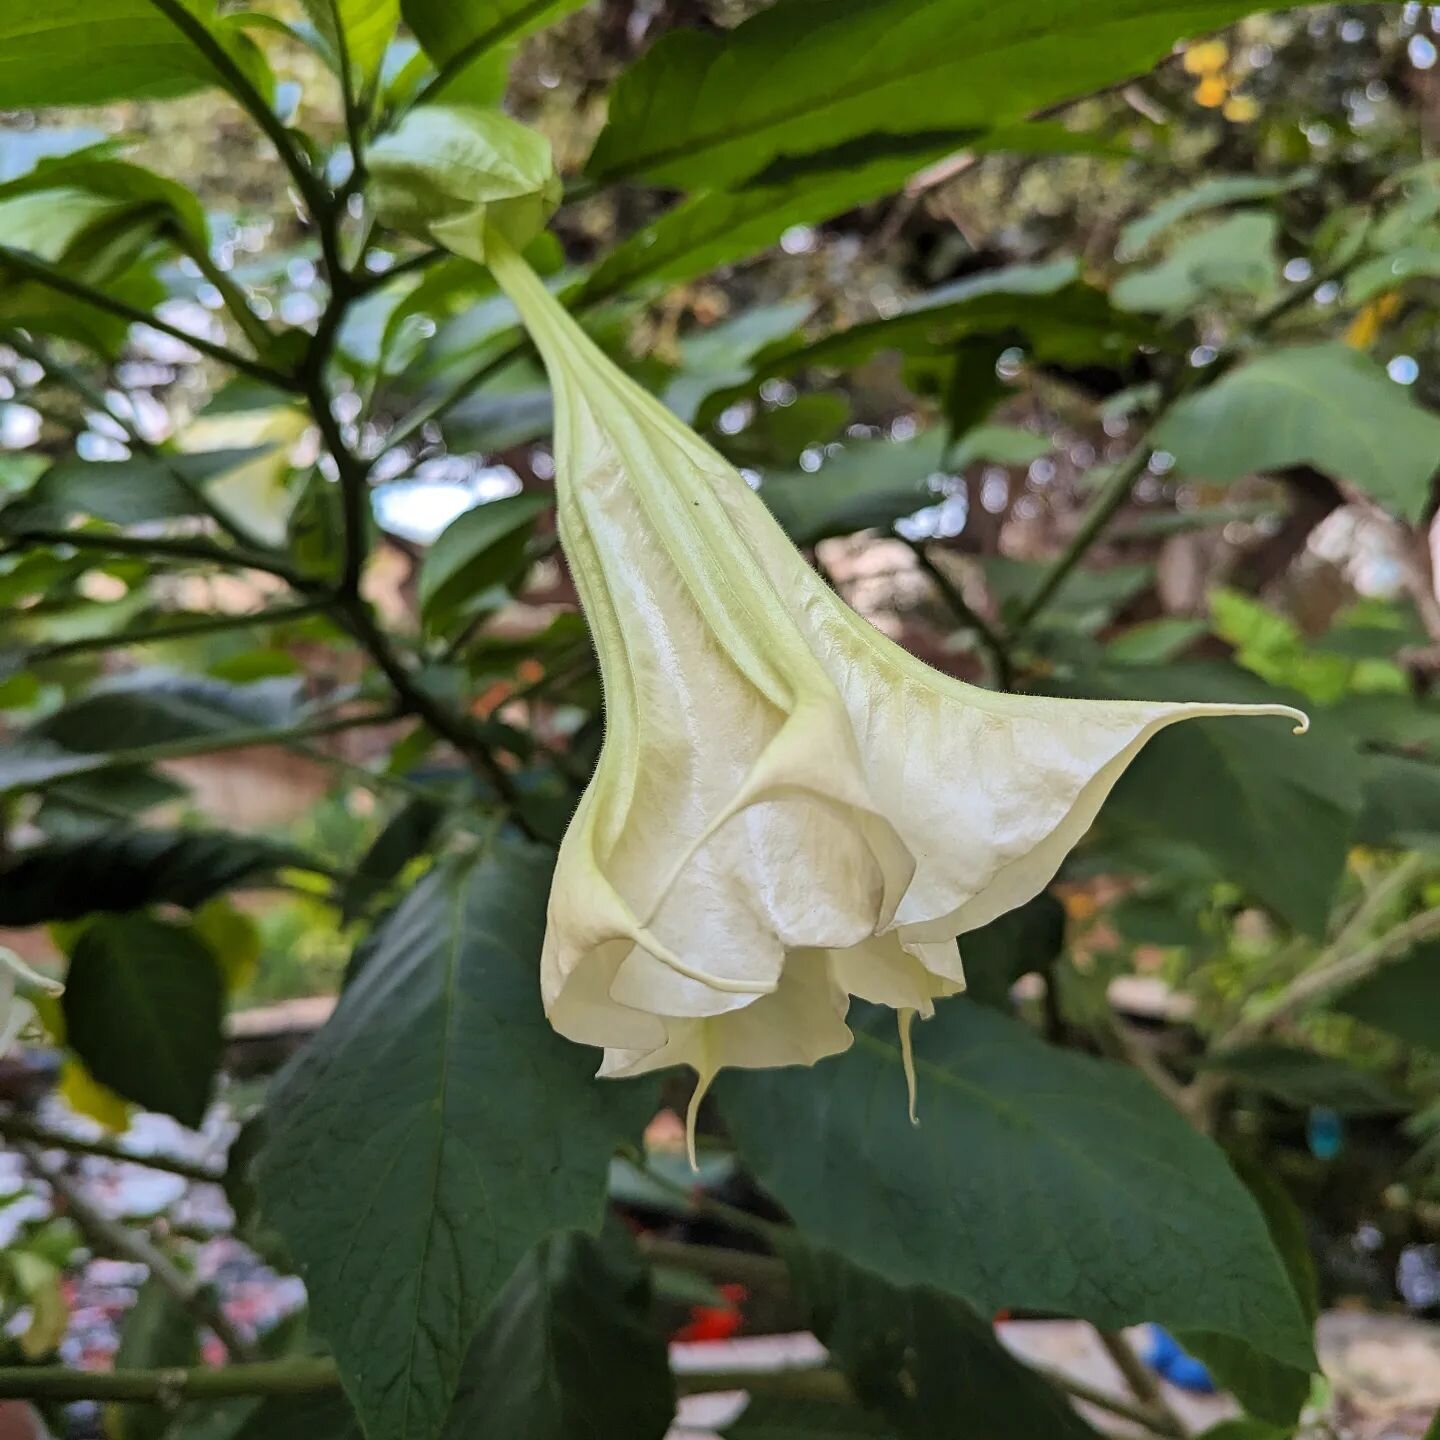 The Brugmansia is still flowering. It was in the 70's last week but after the rain it cooled down. Still no frost yet.